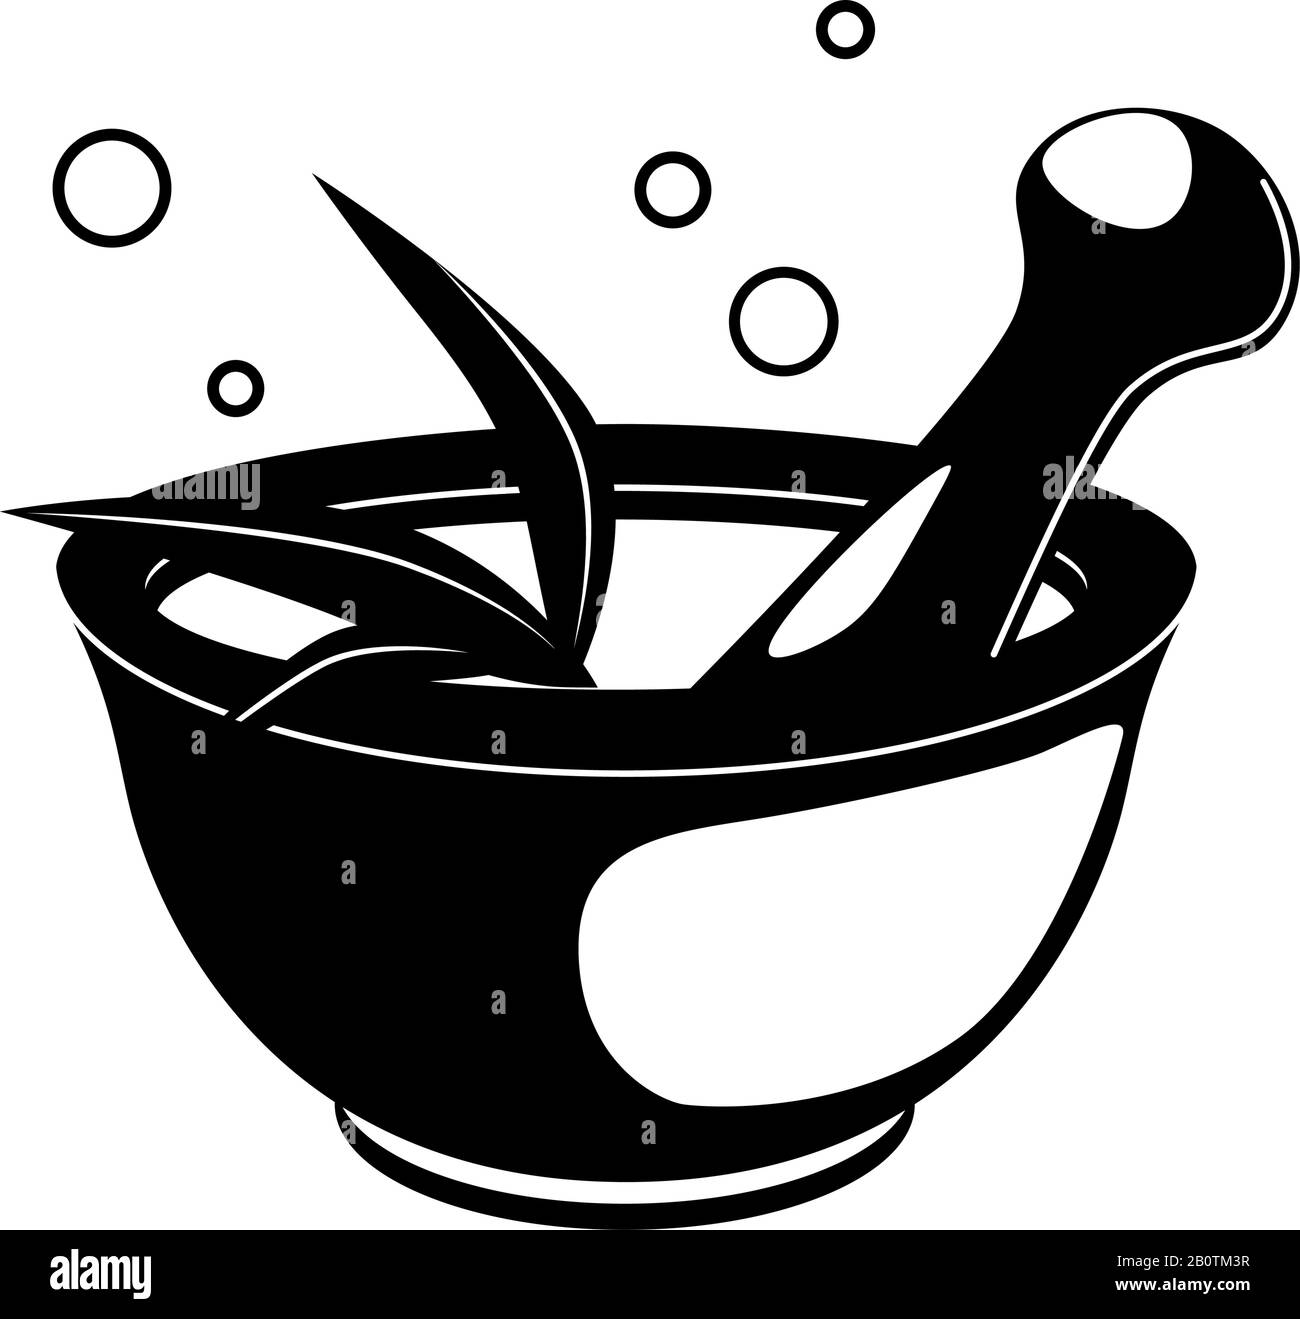 Glyph mortar and pestle icon. Spa, wellness, chemistry, pharmaceutical black silhouette for social media design. Nature Health care Vector isolated object white background. Cosmetic symbol. Stock Vector